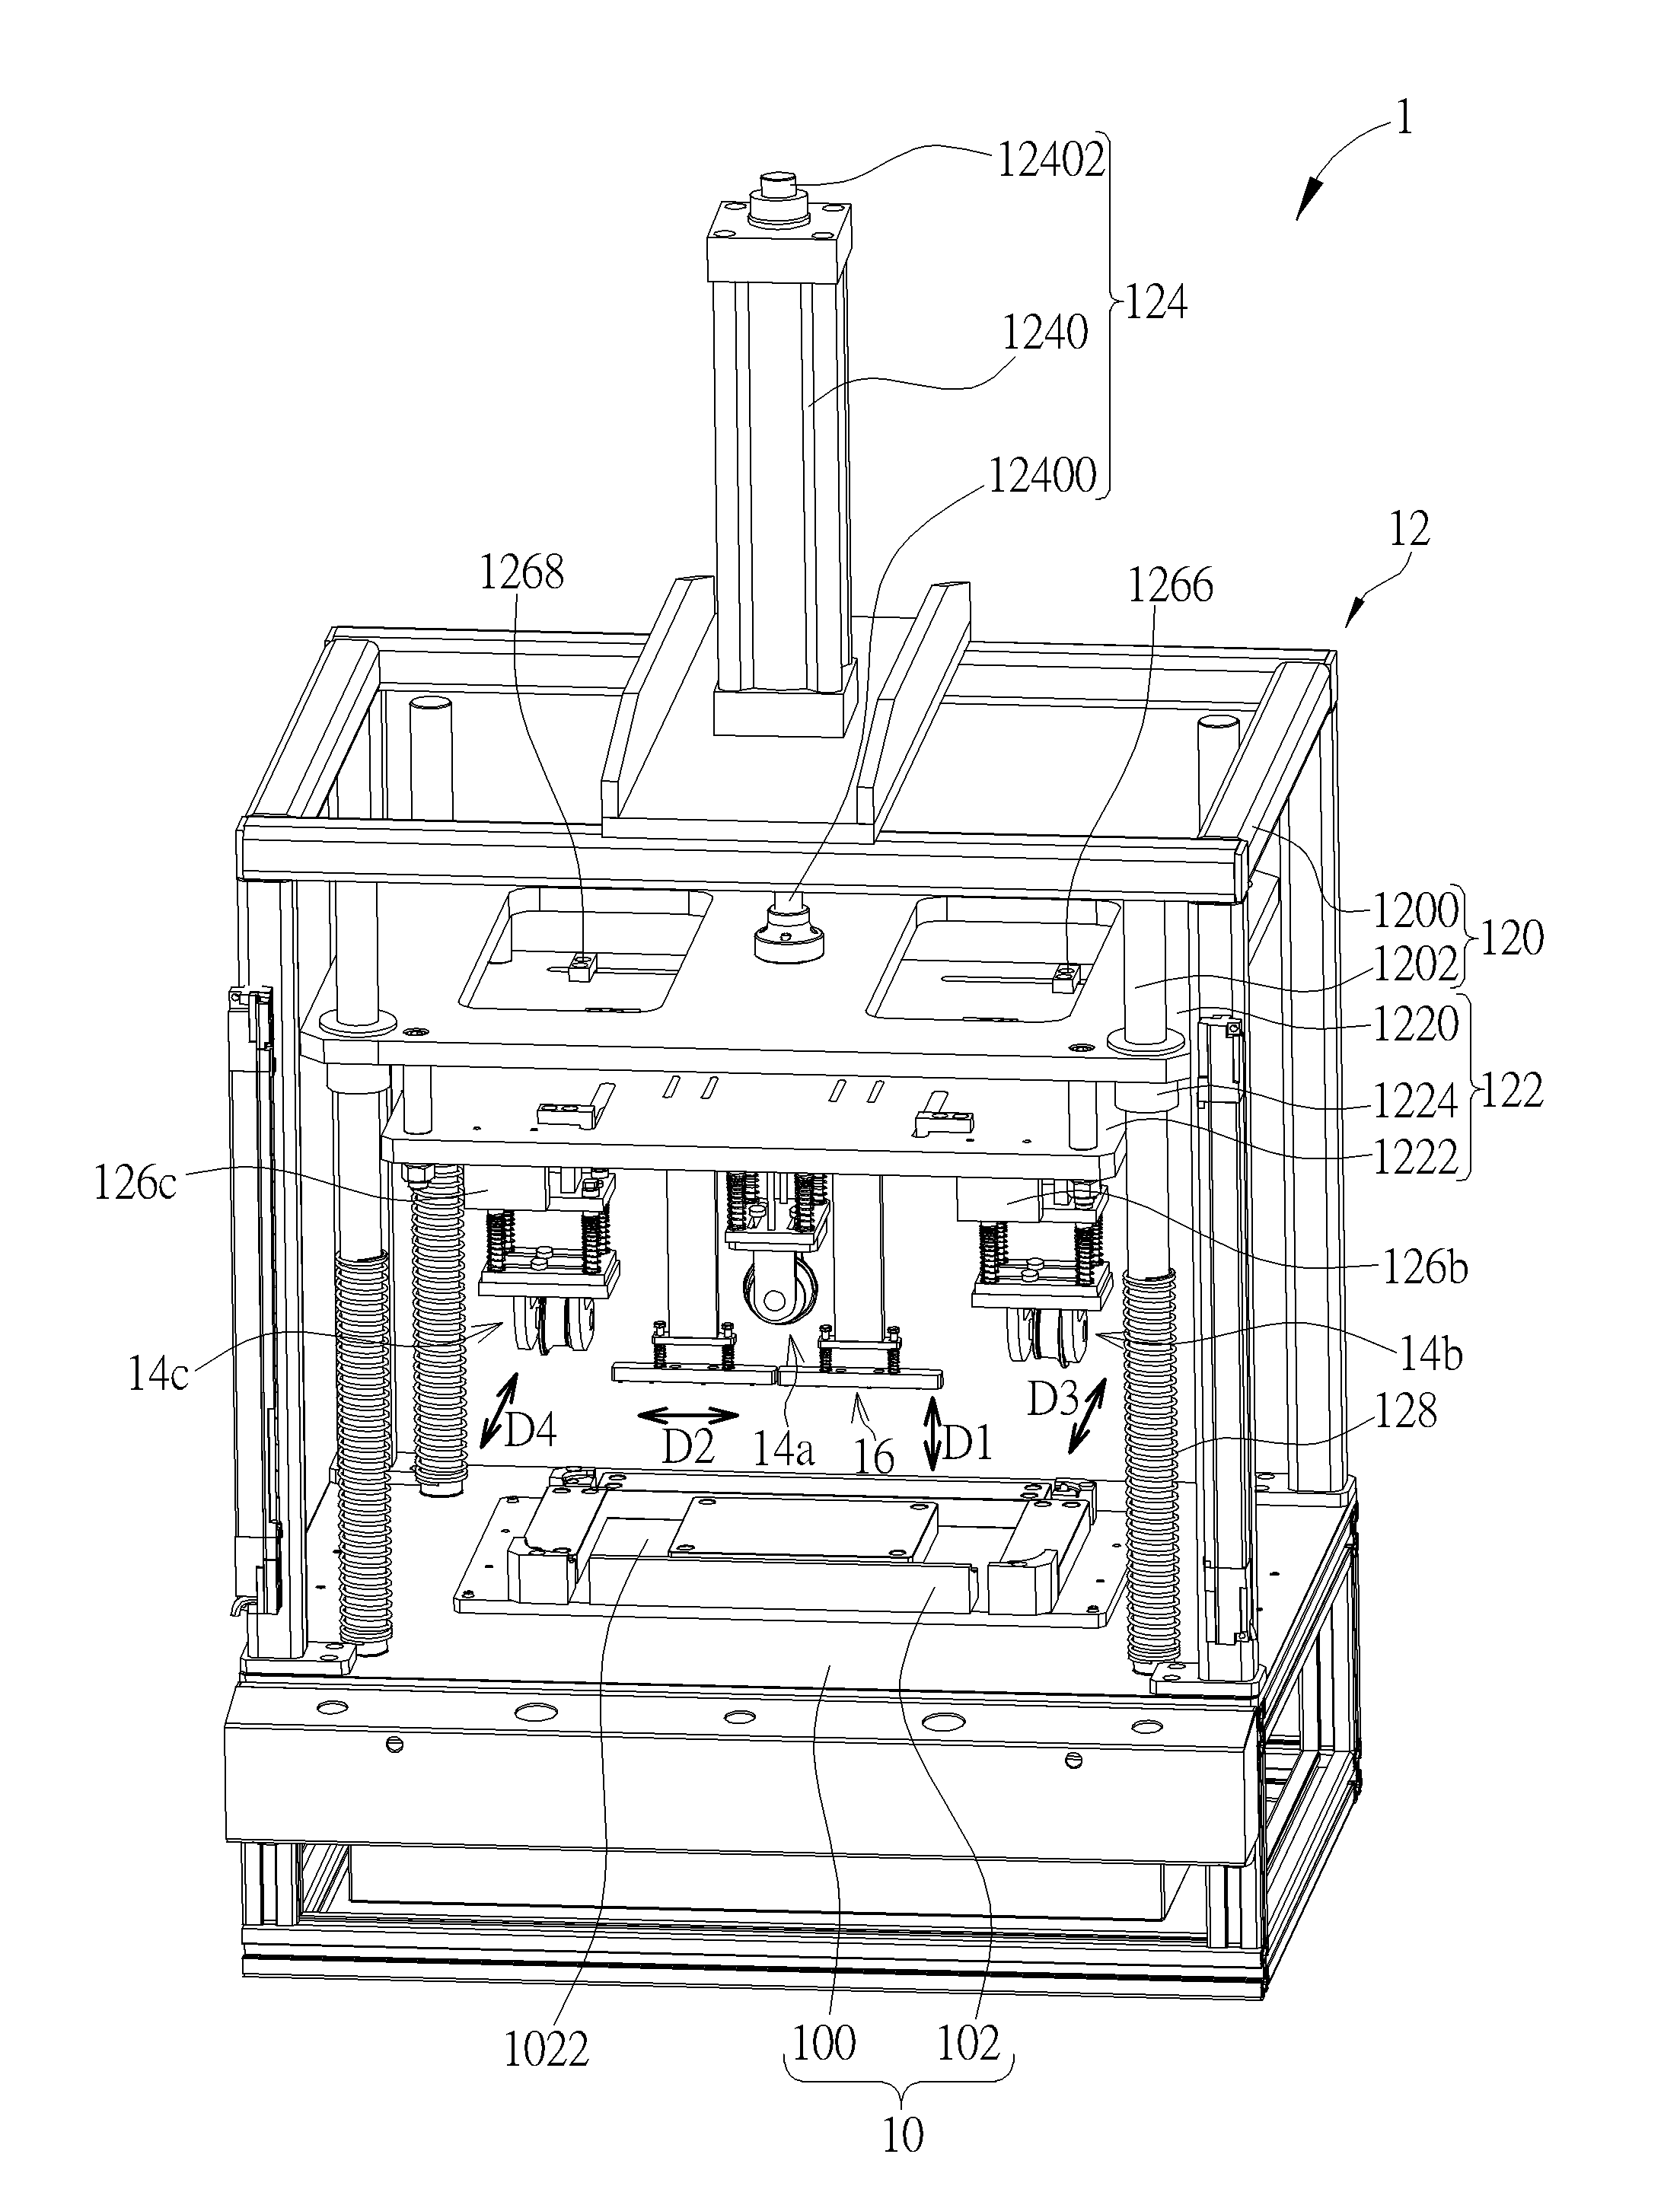 Press-fit assembly apparatus